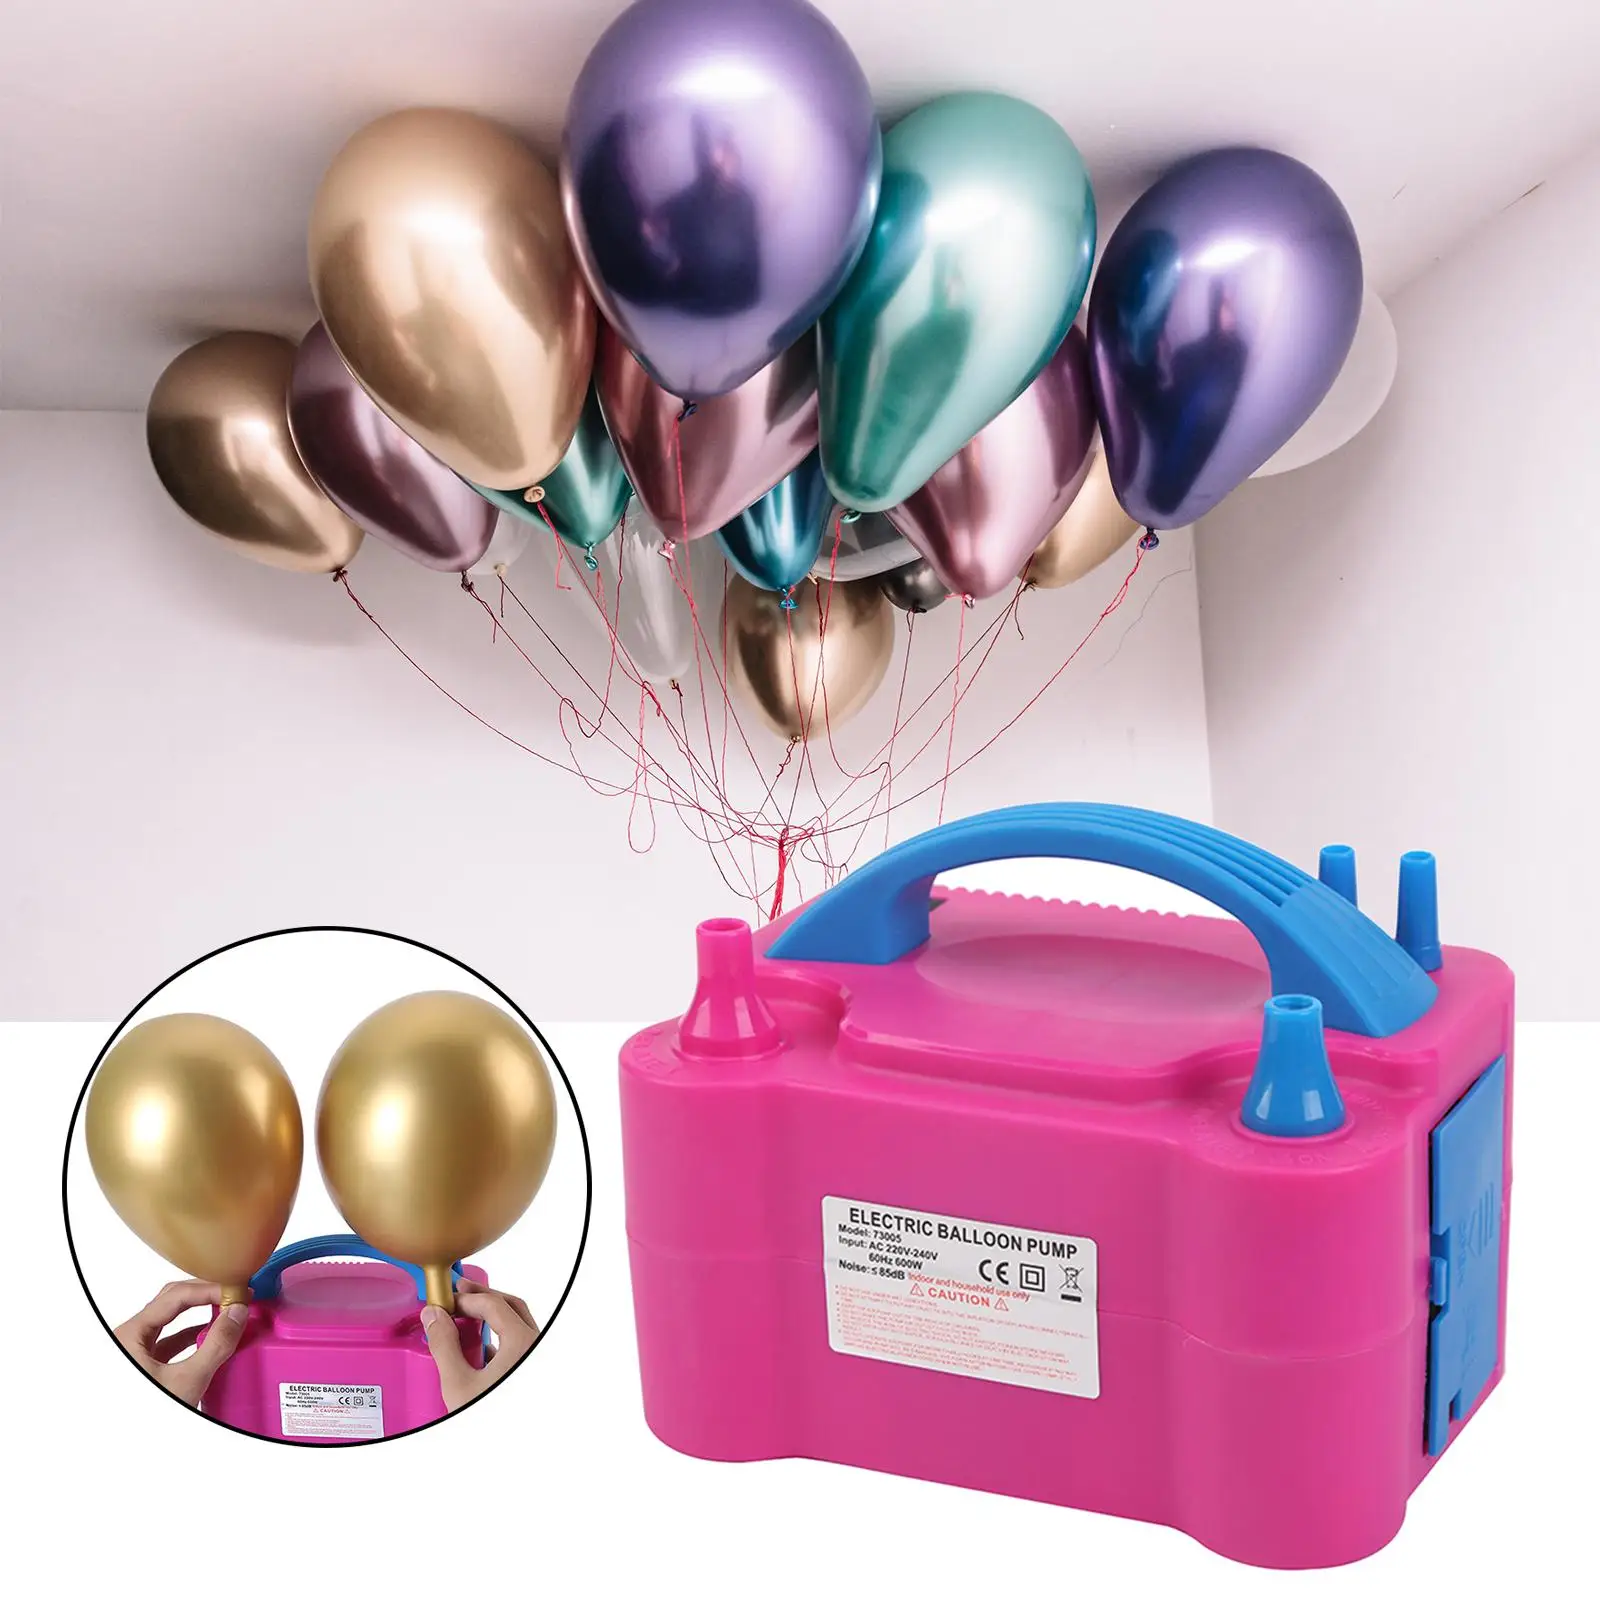 Electric Balloon Pump Inflator Air Blower 600W Dual Nozzle Bulk Balloons Filling for Festival Party Holiday Birthday Baby Shower